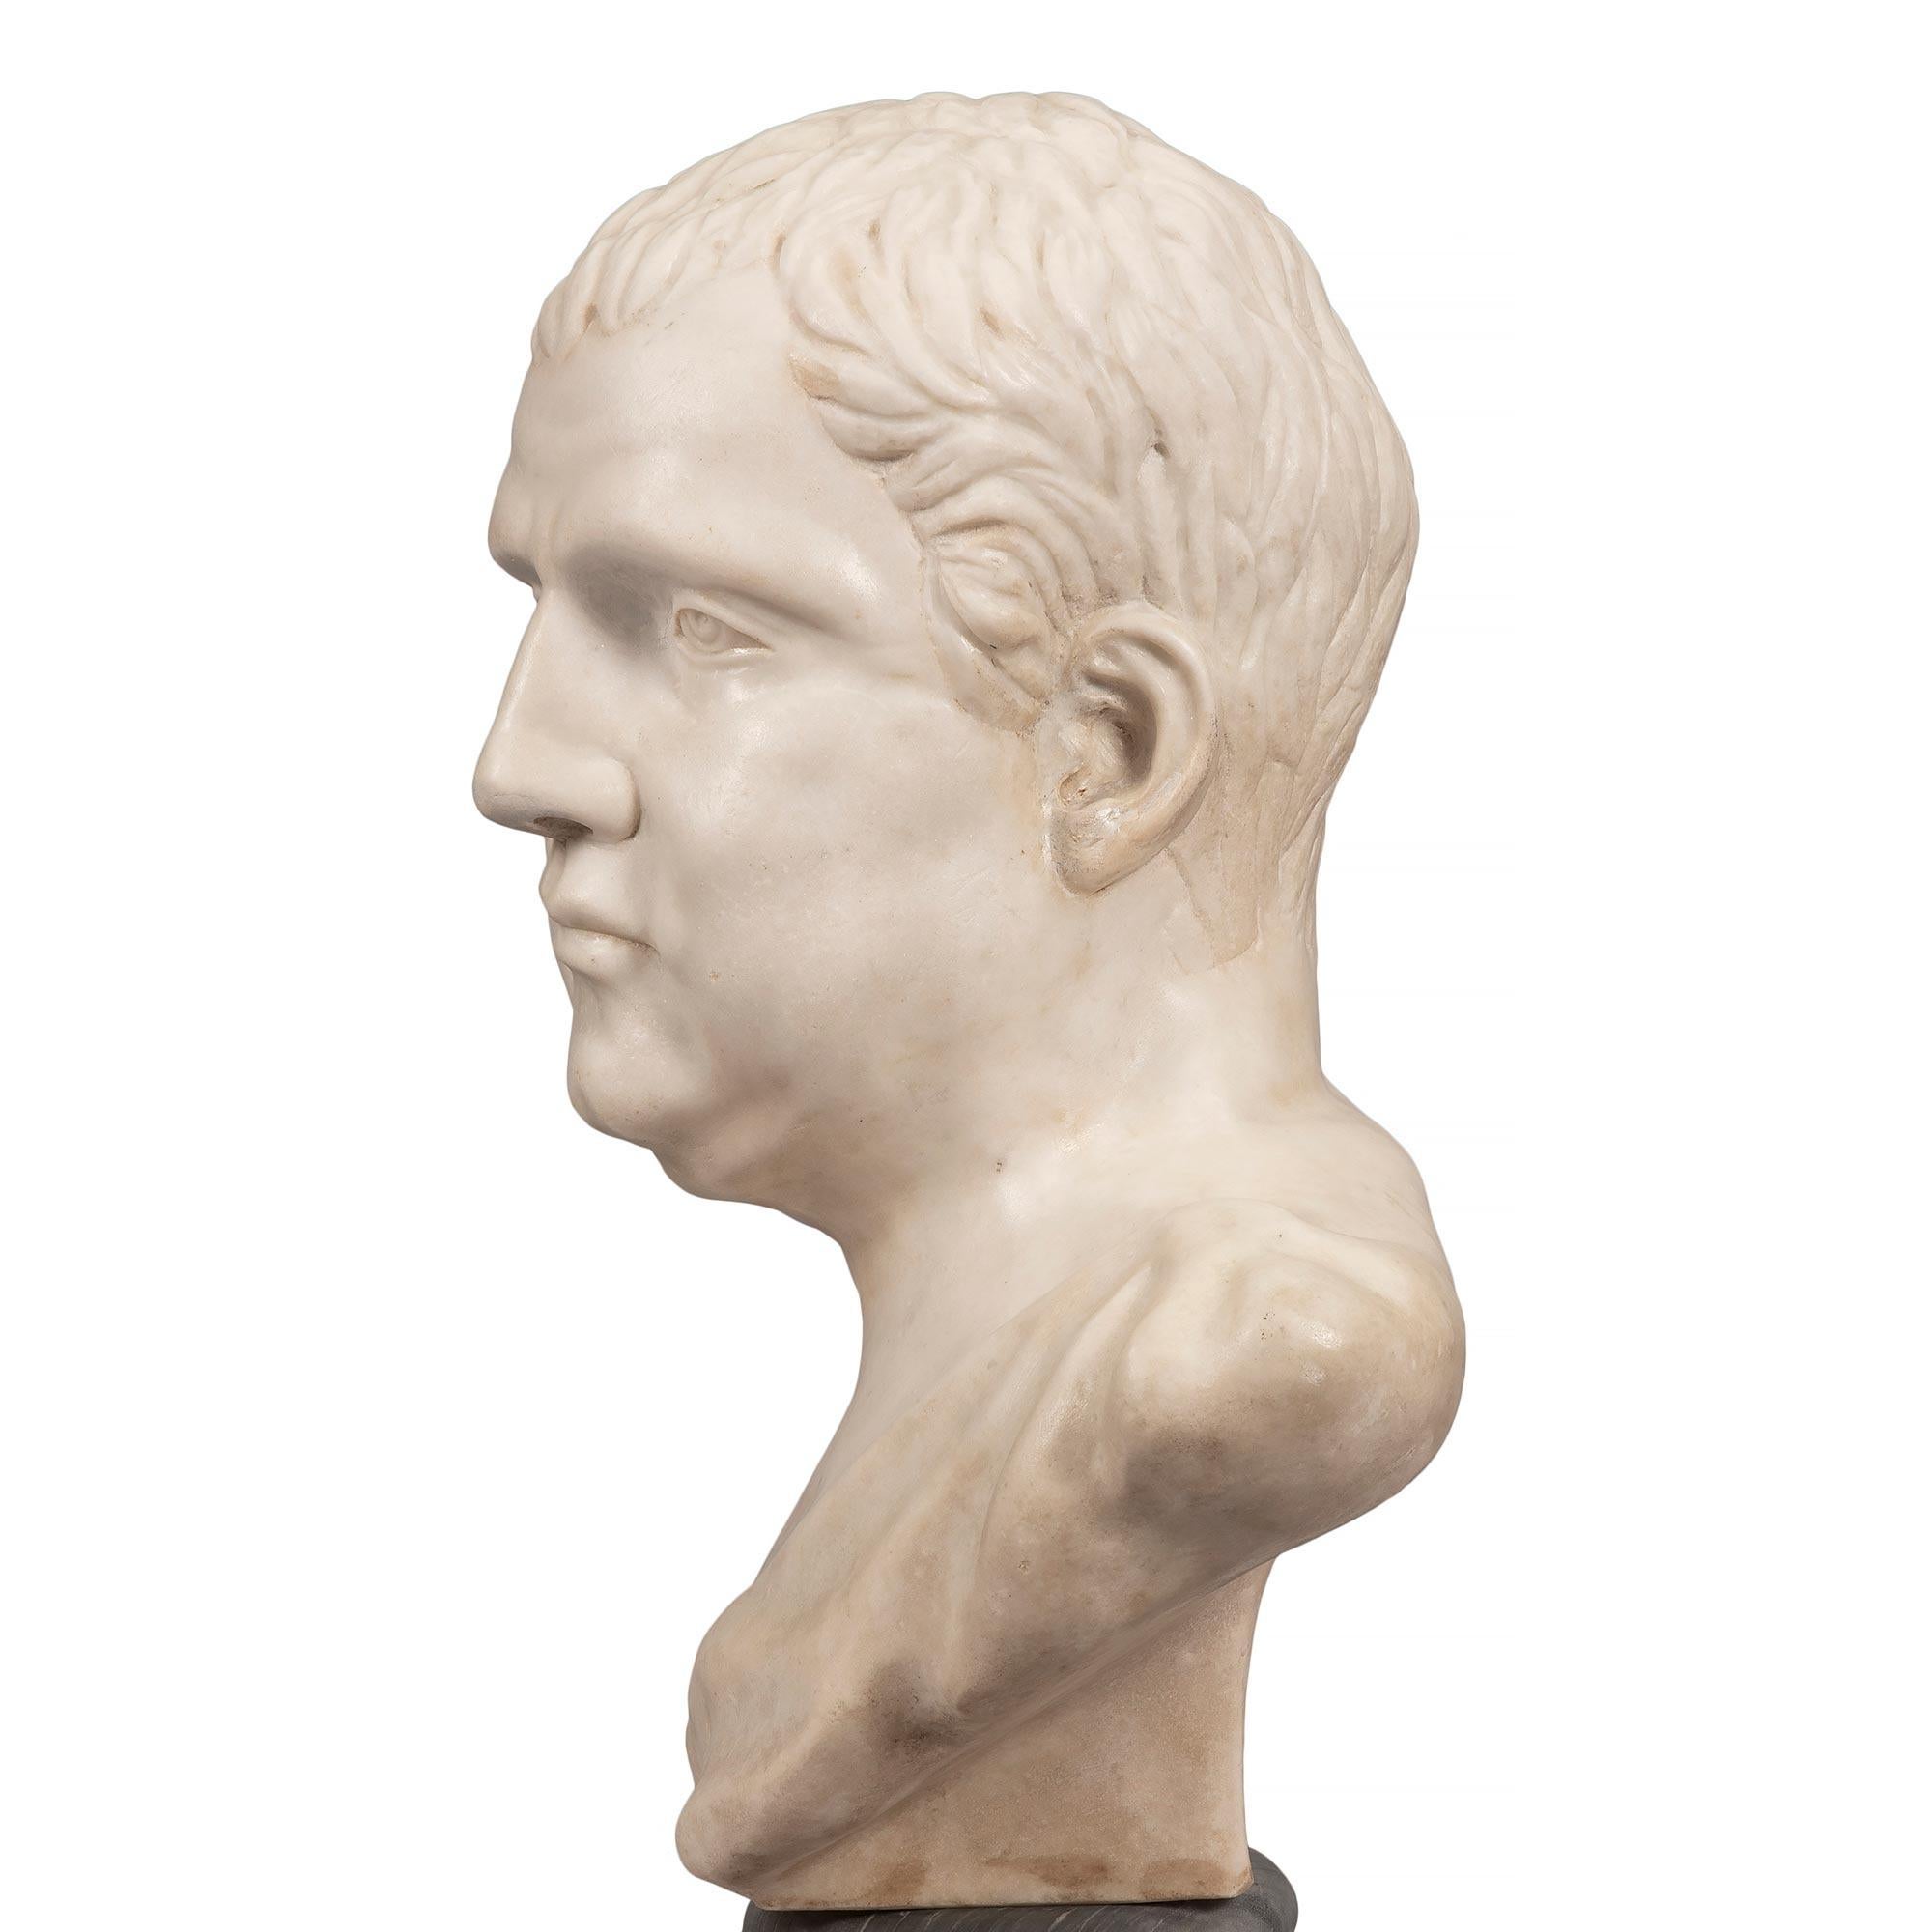 Italian Early 19th Century White Carrara Marble Bust of a Roman Emperor For Sale 2